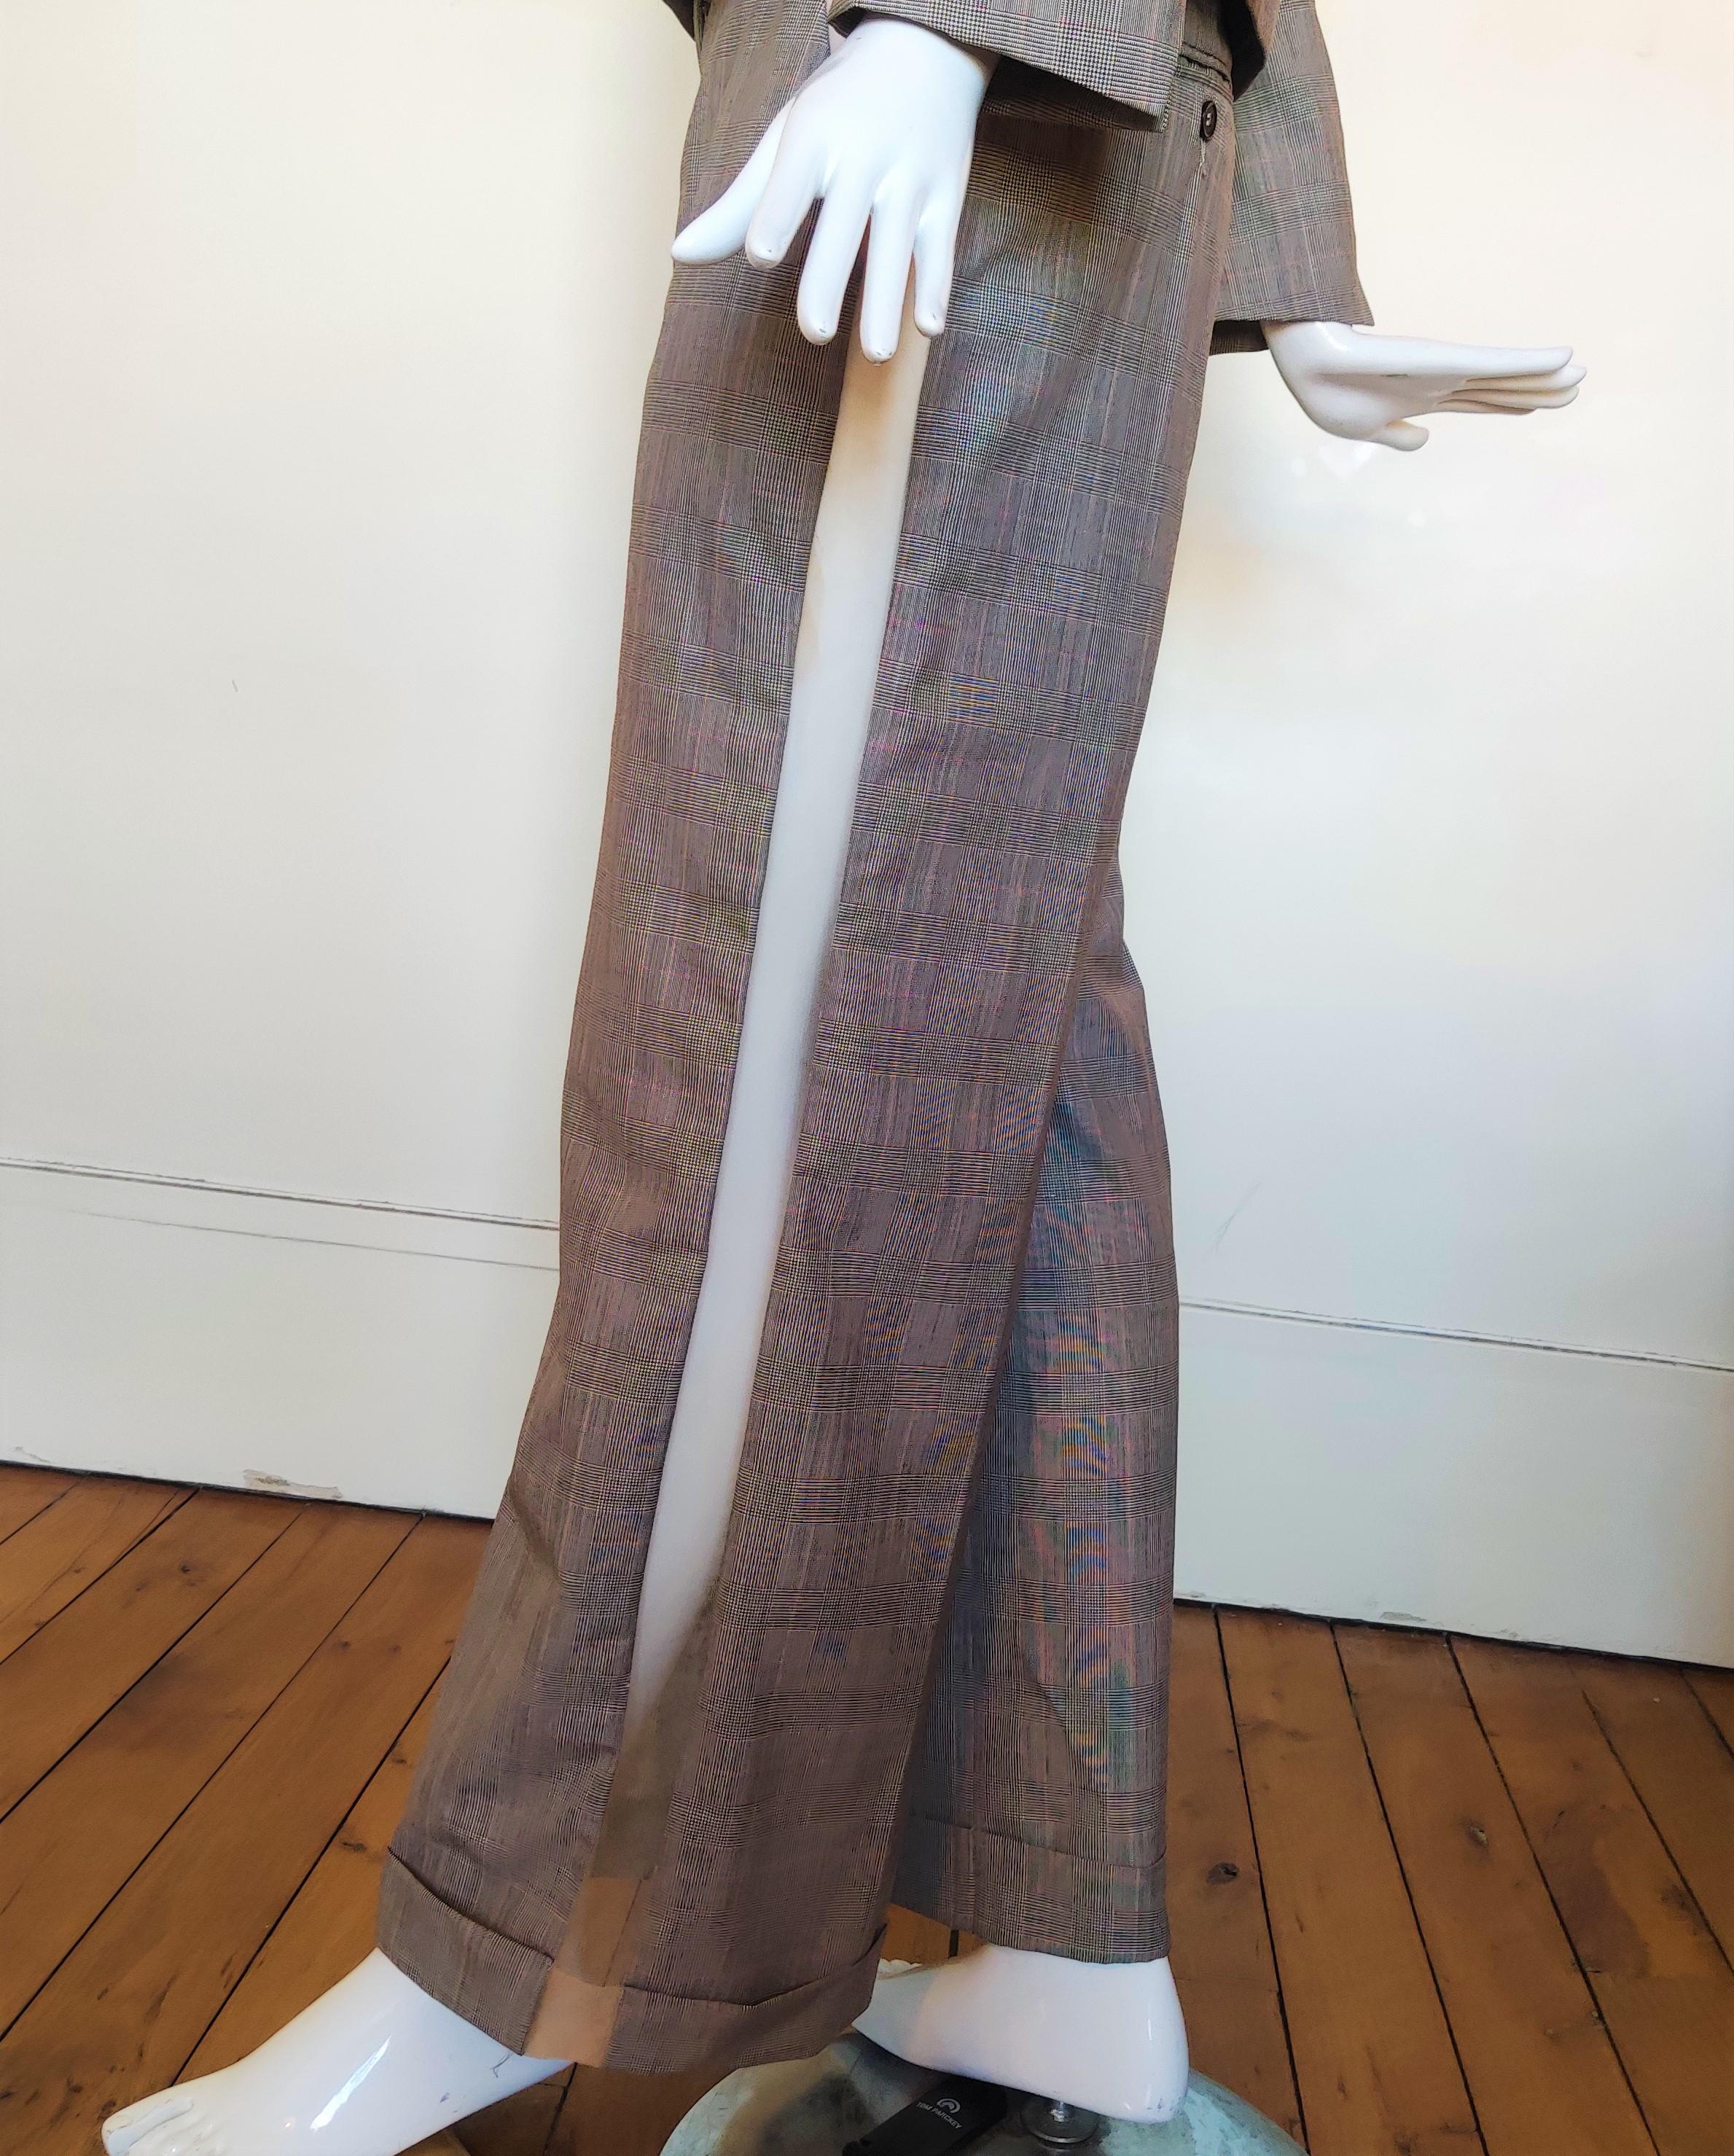 Alexander McQueen Deliverance 2004 S/S Runway Couture Check Suit Pants Costume In Excellent Condition For Sale In PARIS, FR